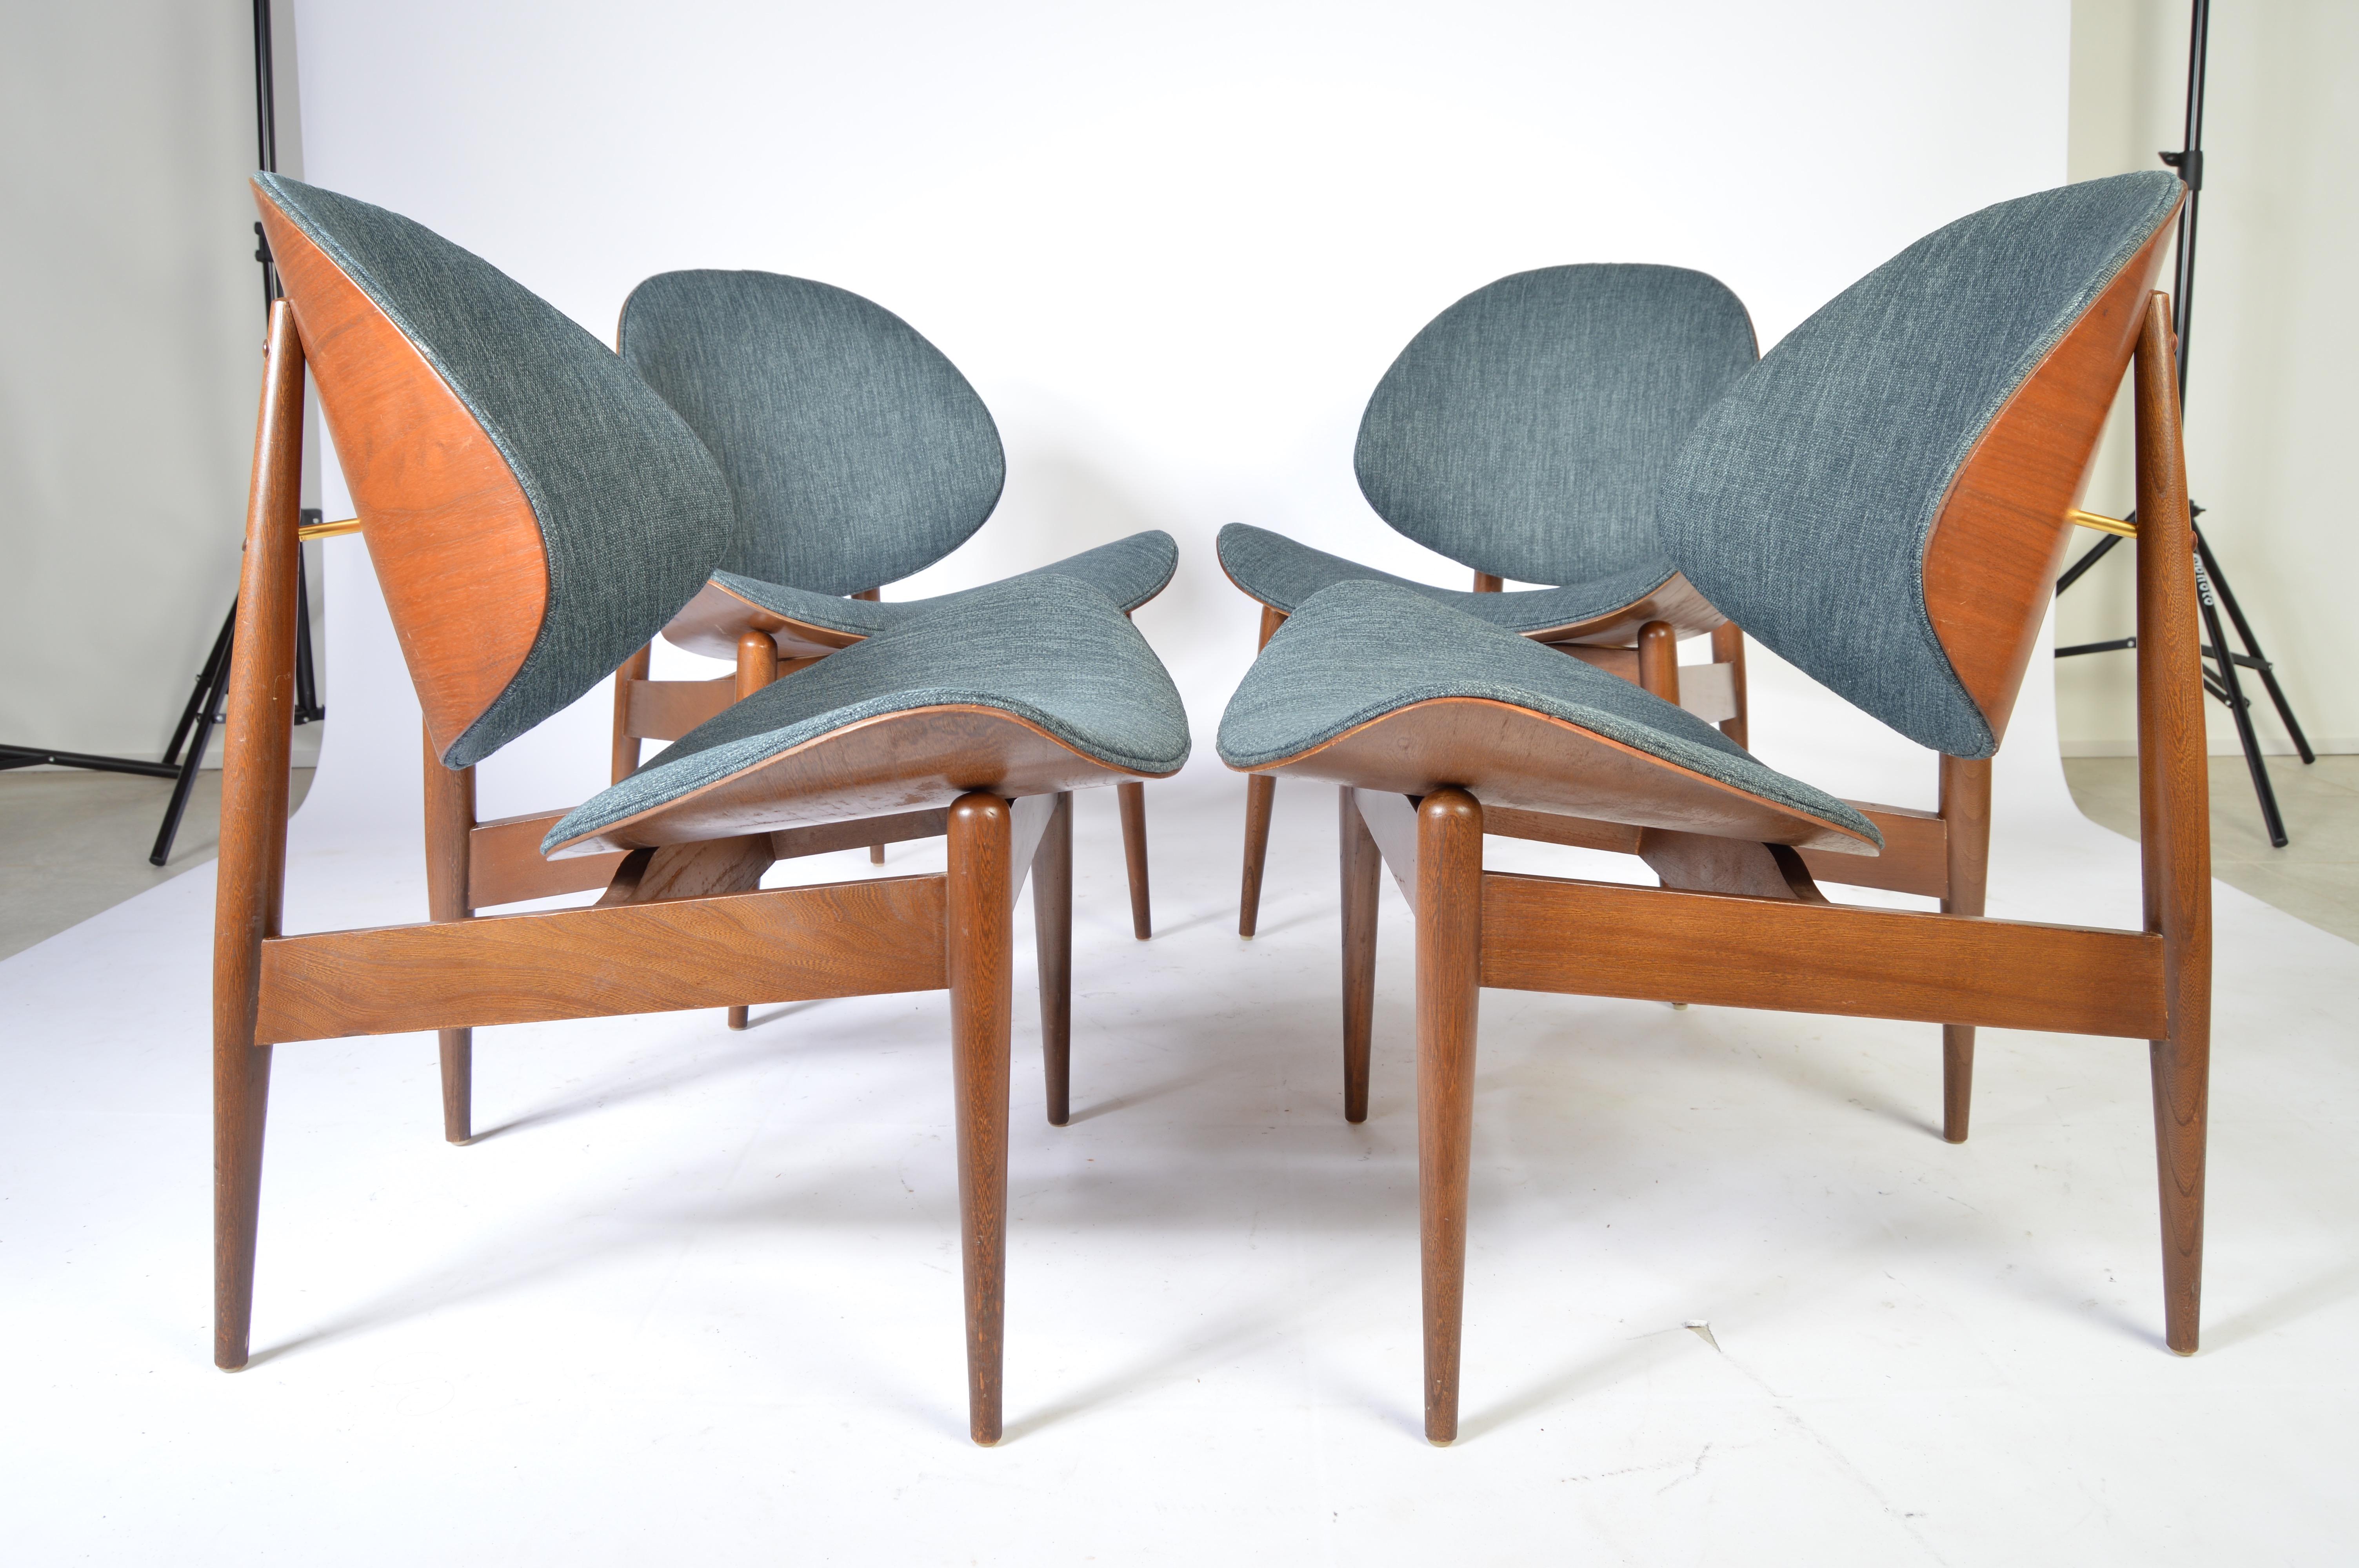 Set of four bentwood clam chairs designed by Seymour James Wiener for Kodawood having mid-blue tweed upholstery.
Newly reupholstered and cushioned having beautifully maintained wood frames,
circa 1960.